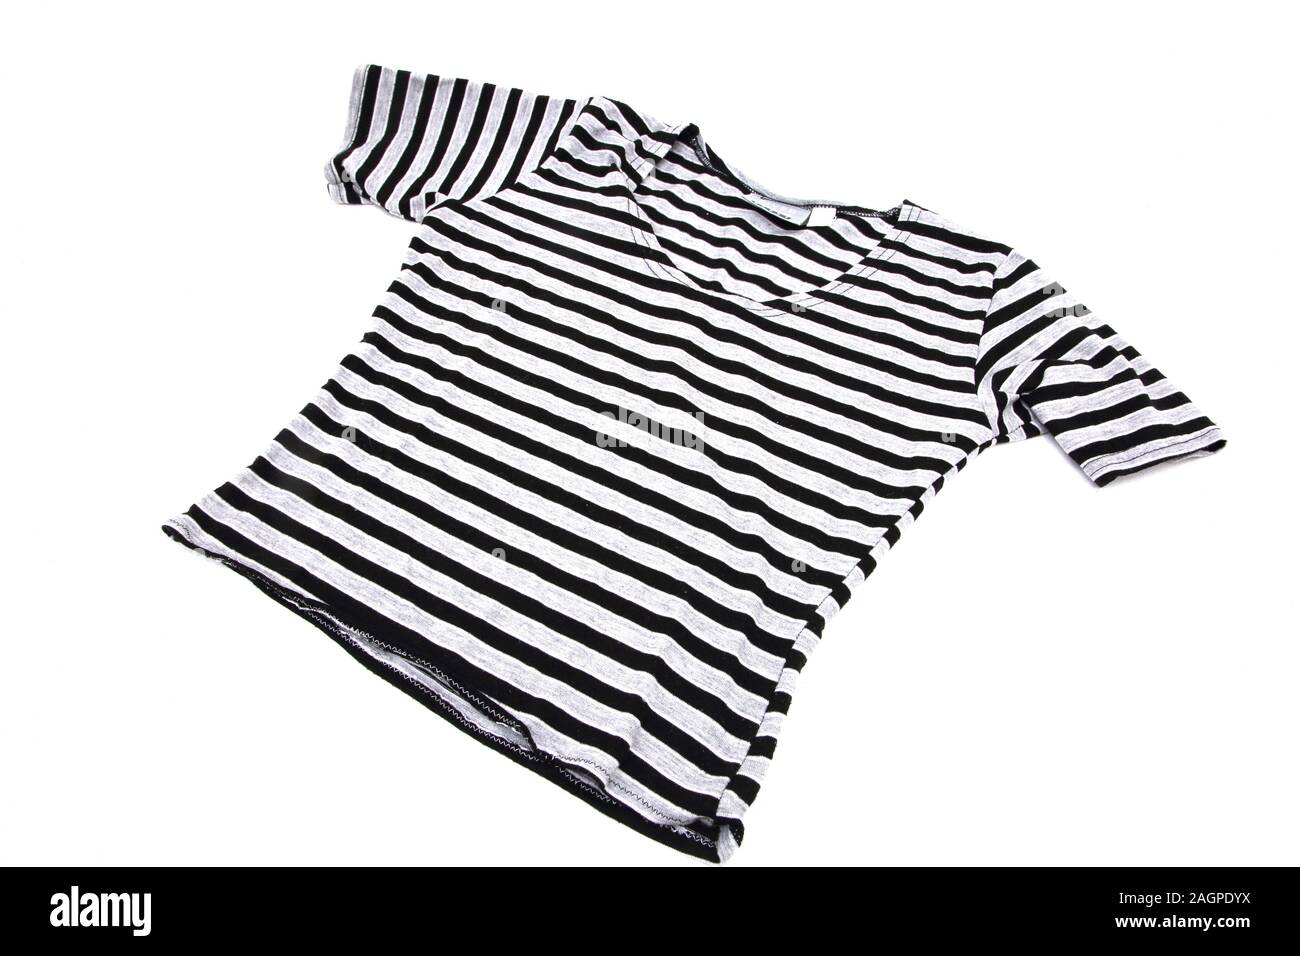 River Island Crop Top T-Shirt with Stripes Stock Photo